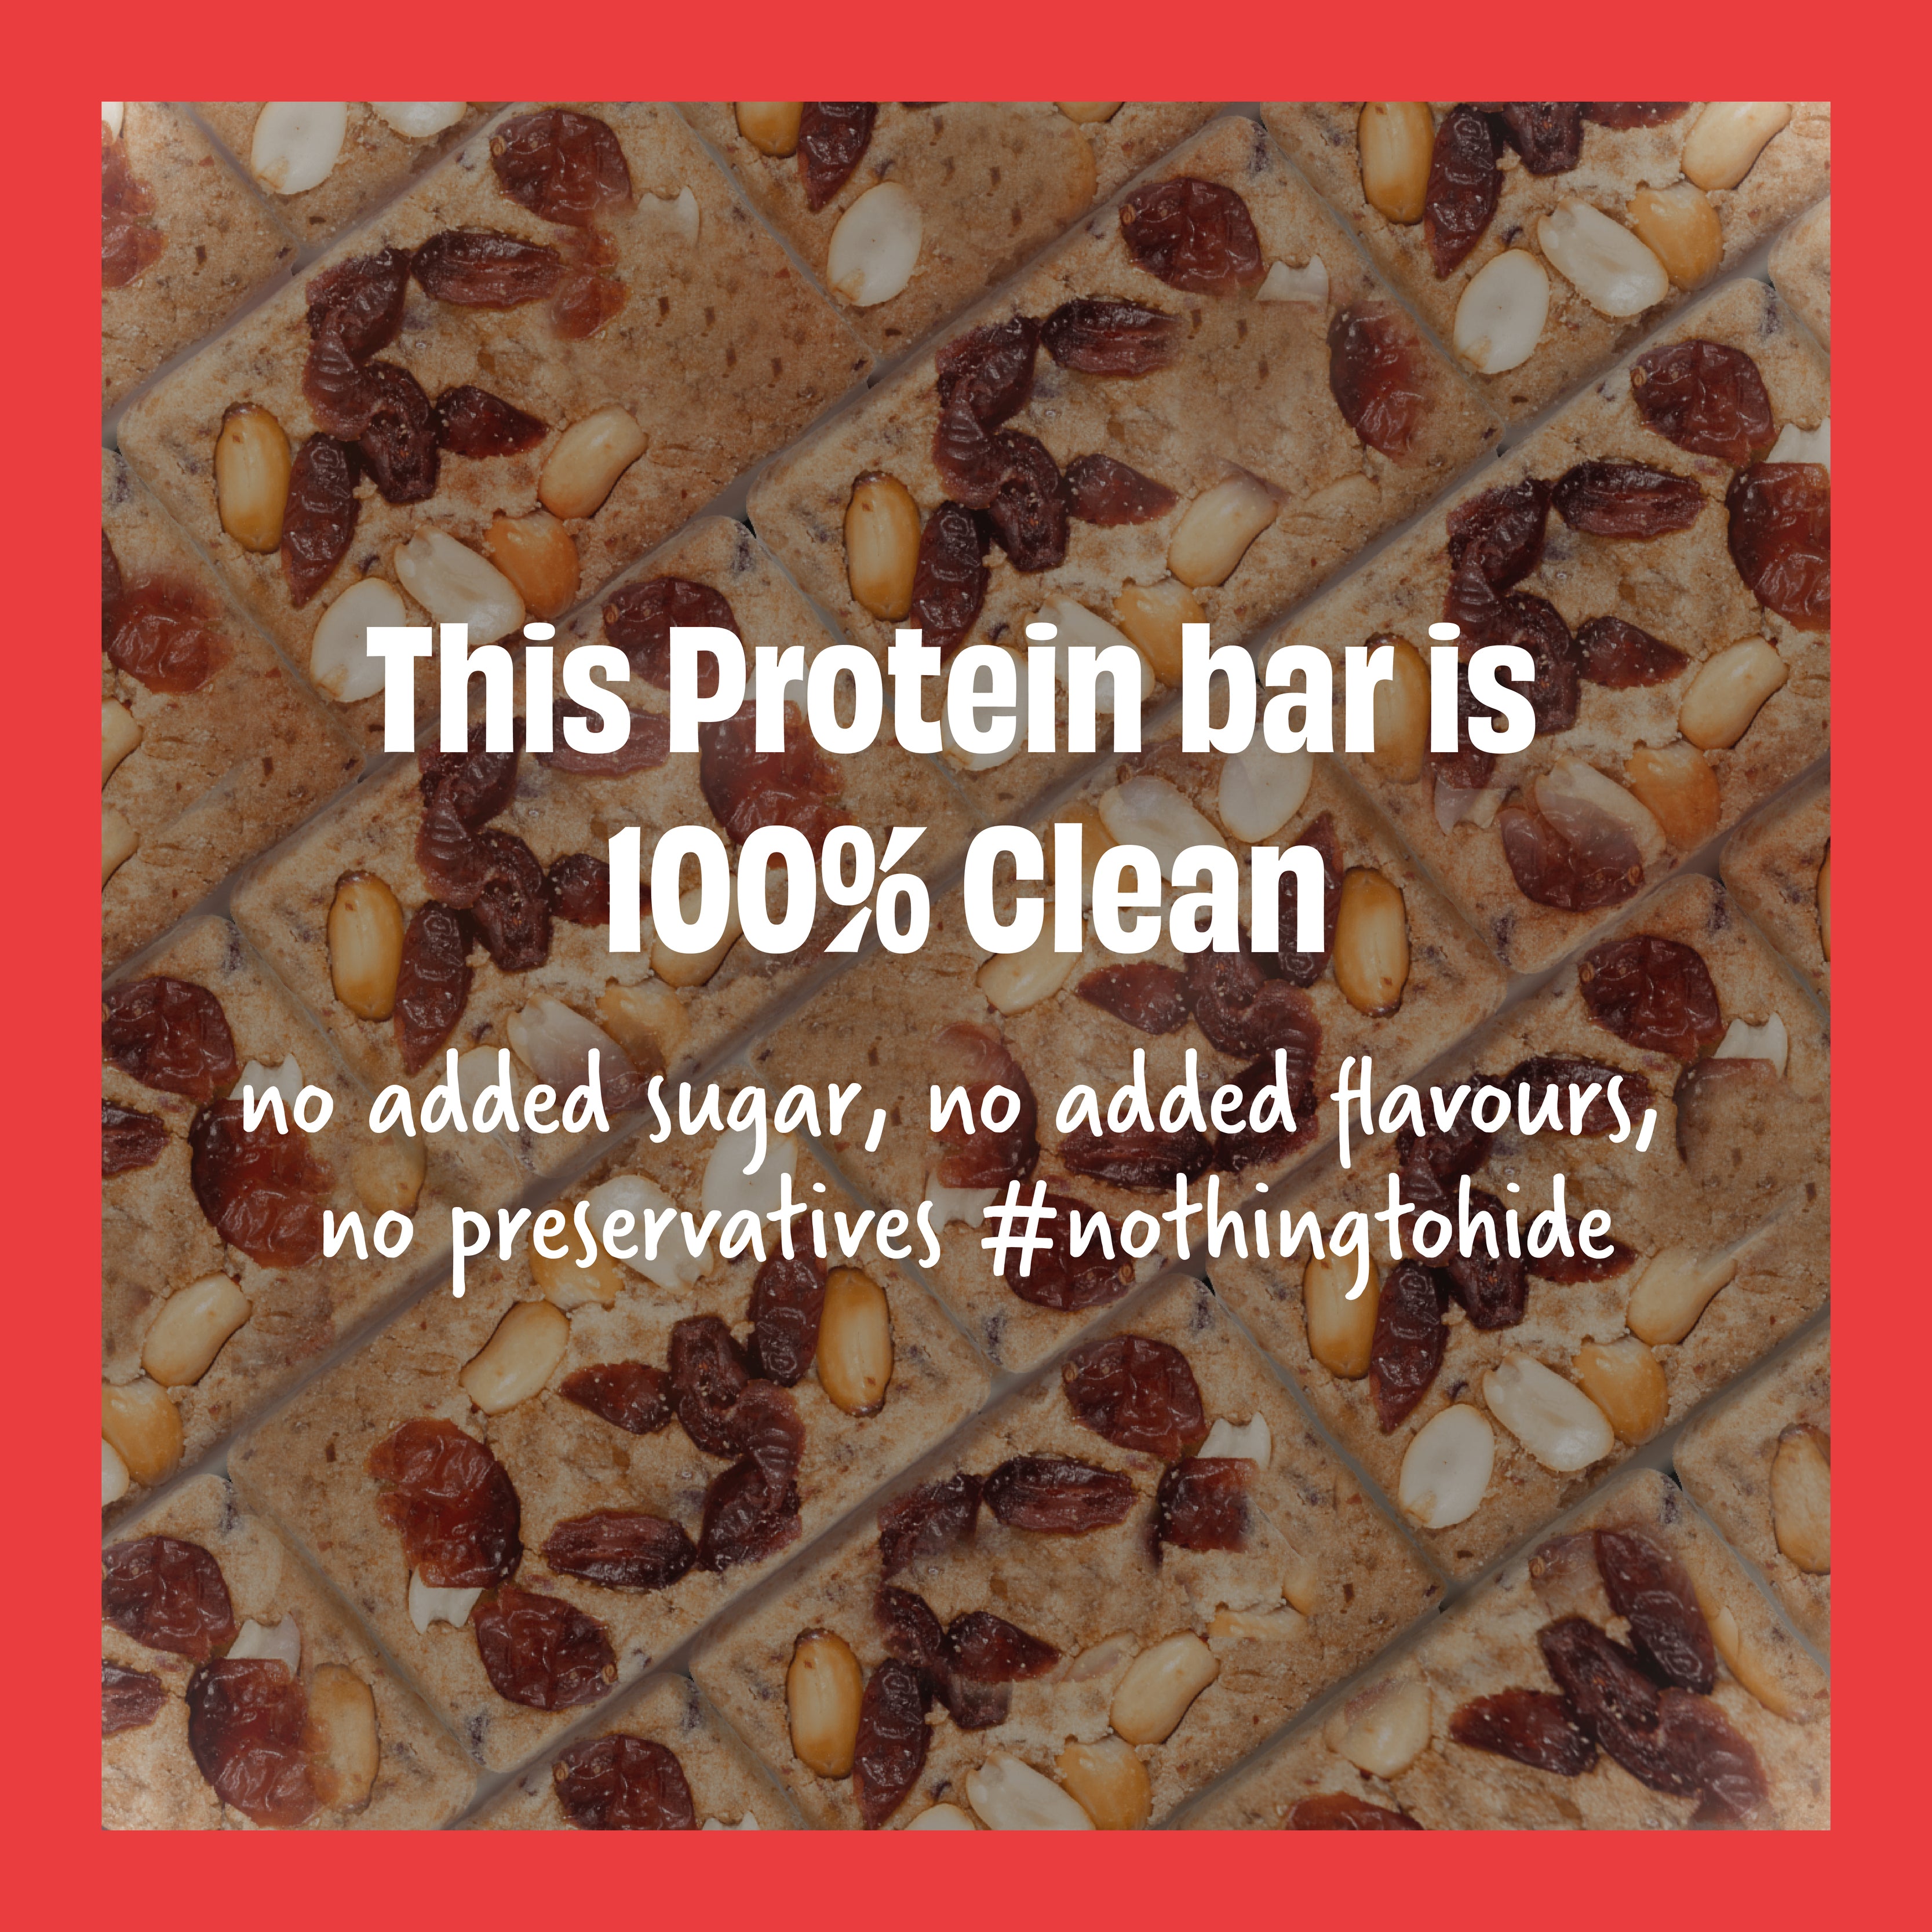 The Whole Truth - Protein Bars - Cranberry - Pack of 6 (6 x 52g) - No Added Sugar - All Natural